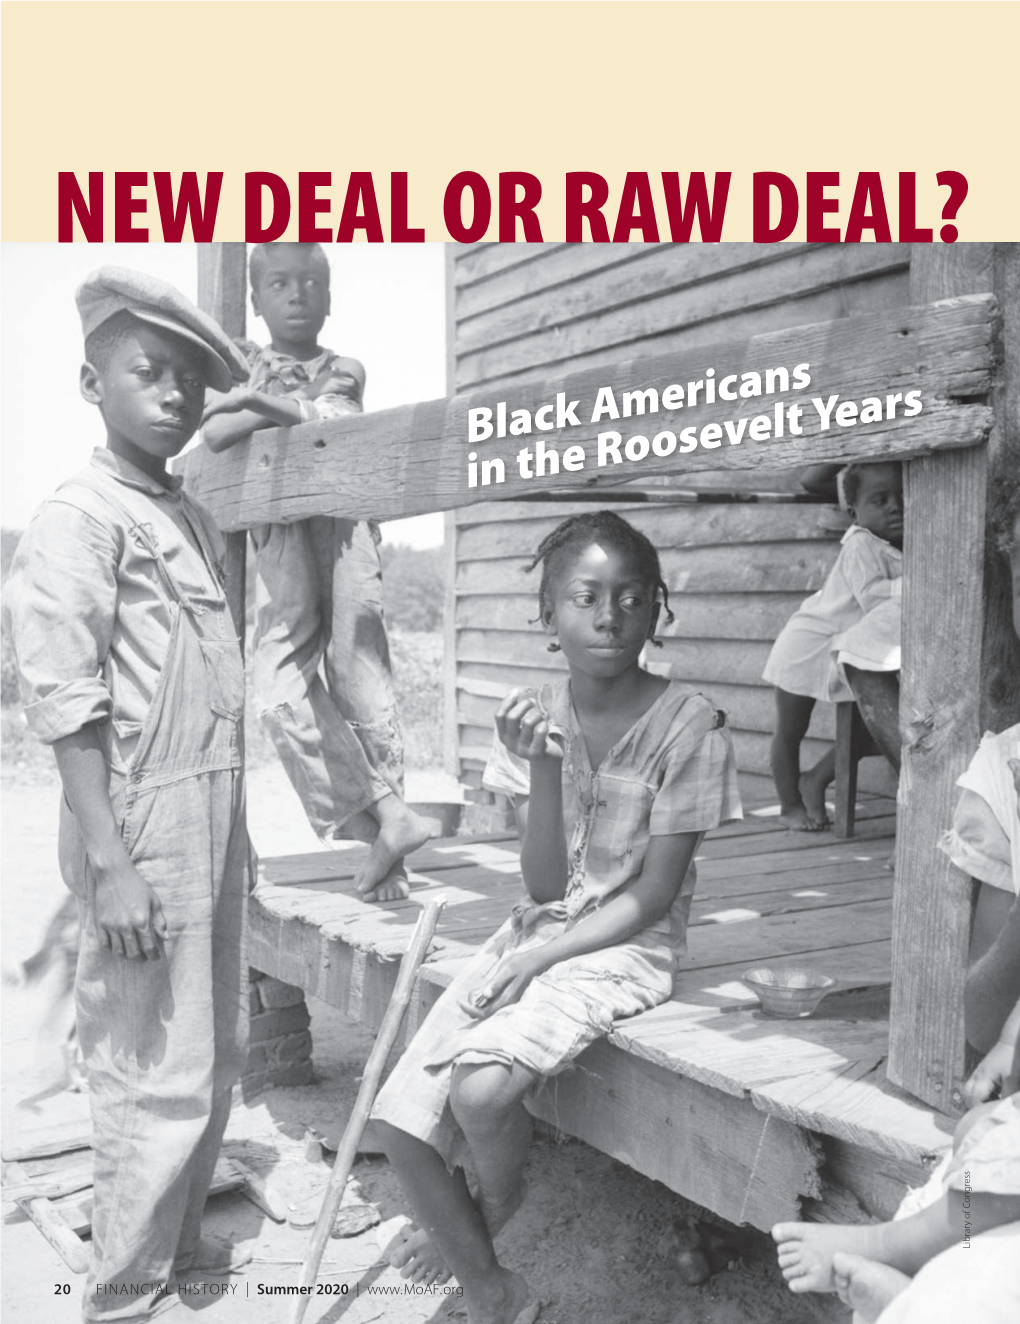 New Deal Or Raw Deal? Black Americans in the Roosevelt Years